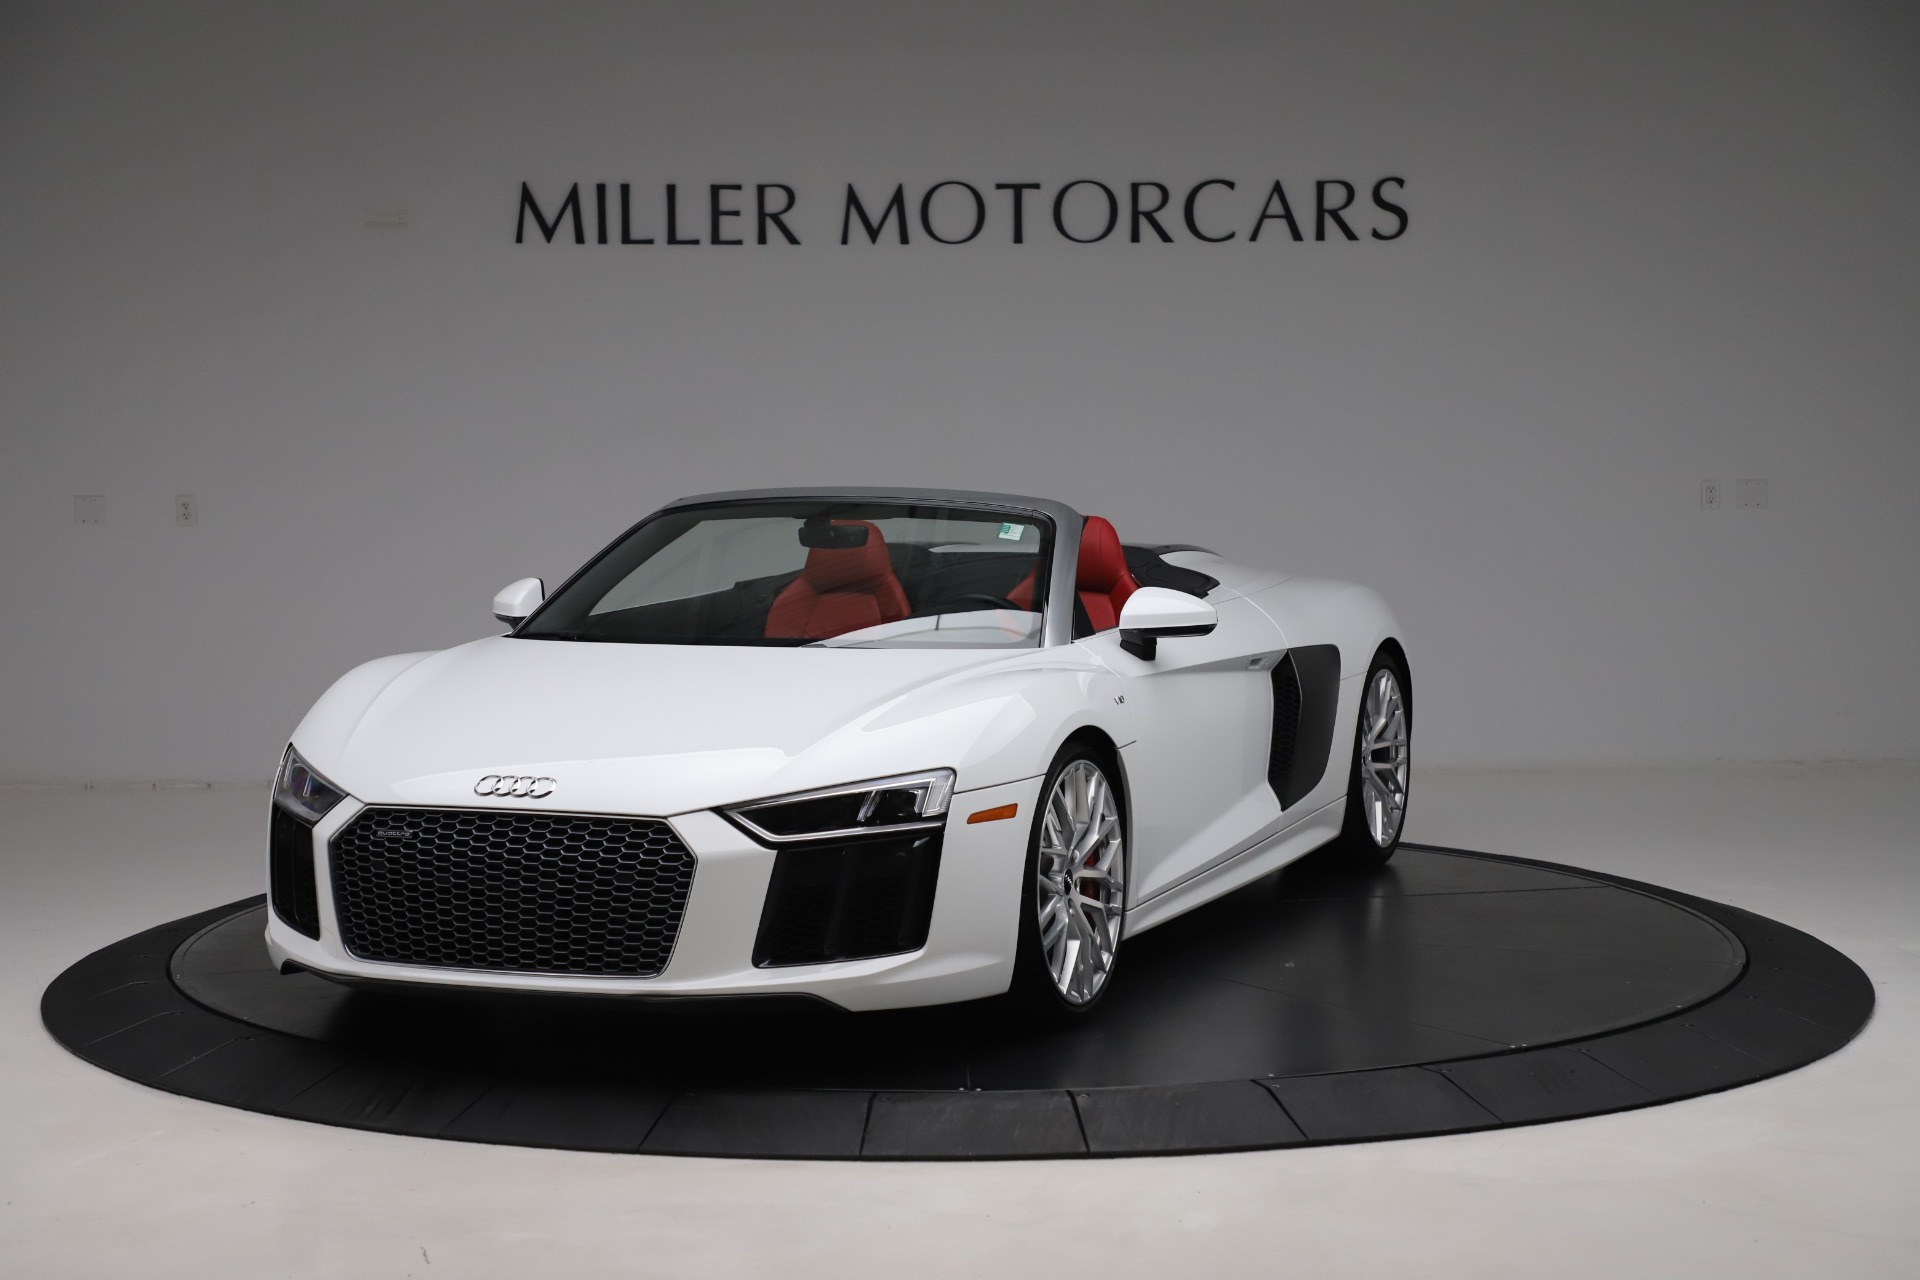 Used 2017 Audi R8 5.2 quattro V10 Spyder for sale Sold at Pagani of Greenwich in Greenwich CT 06830 1